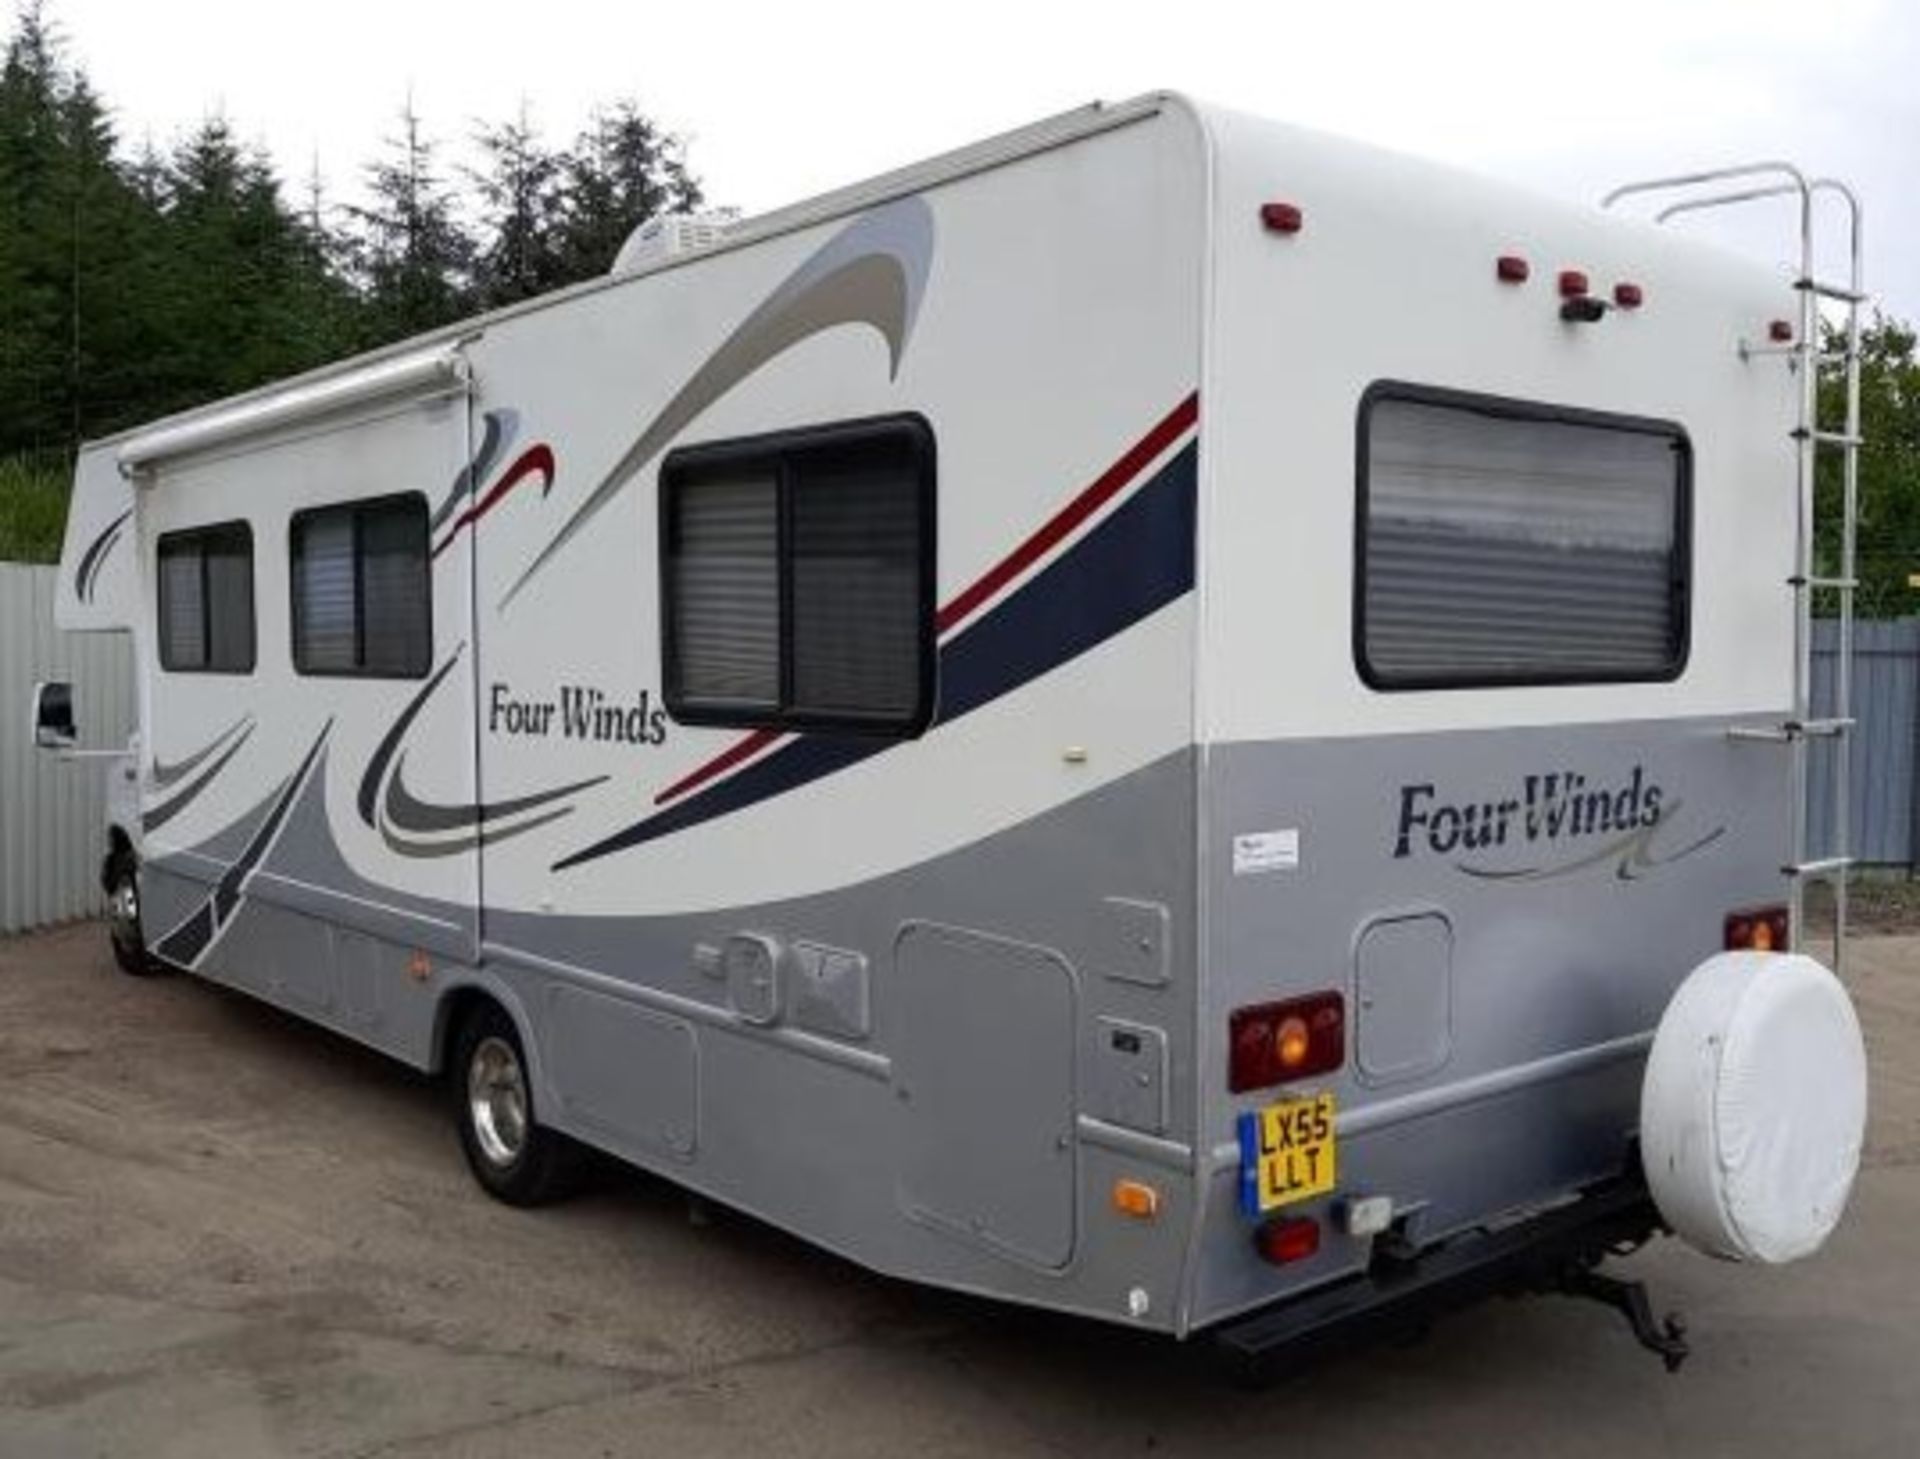 FORD E450 FOURWINDS RV 7 BERTH LHD MOTORHOME, VERY LOW MILEAGE 34,453 MILES *NO VAT* - Image 4 of 13